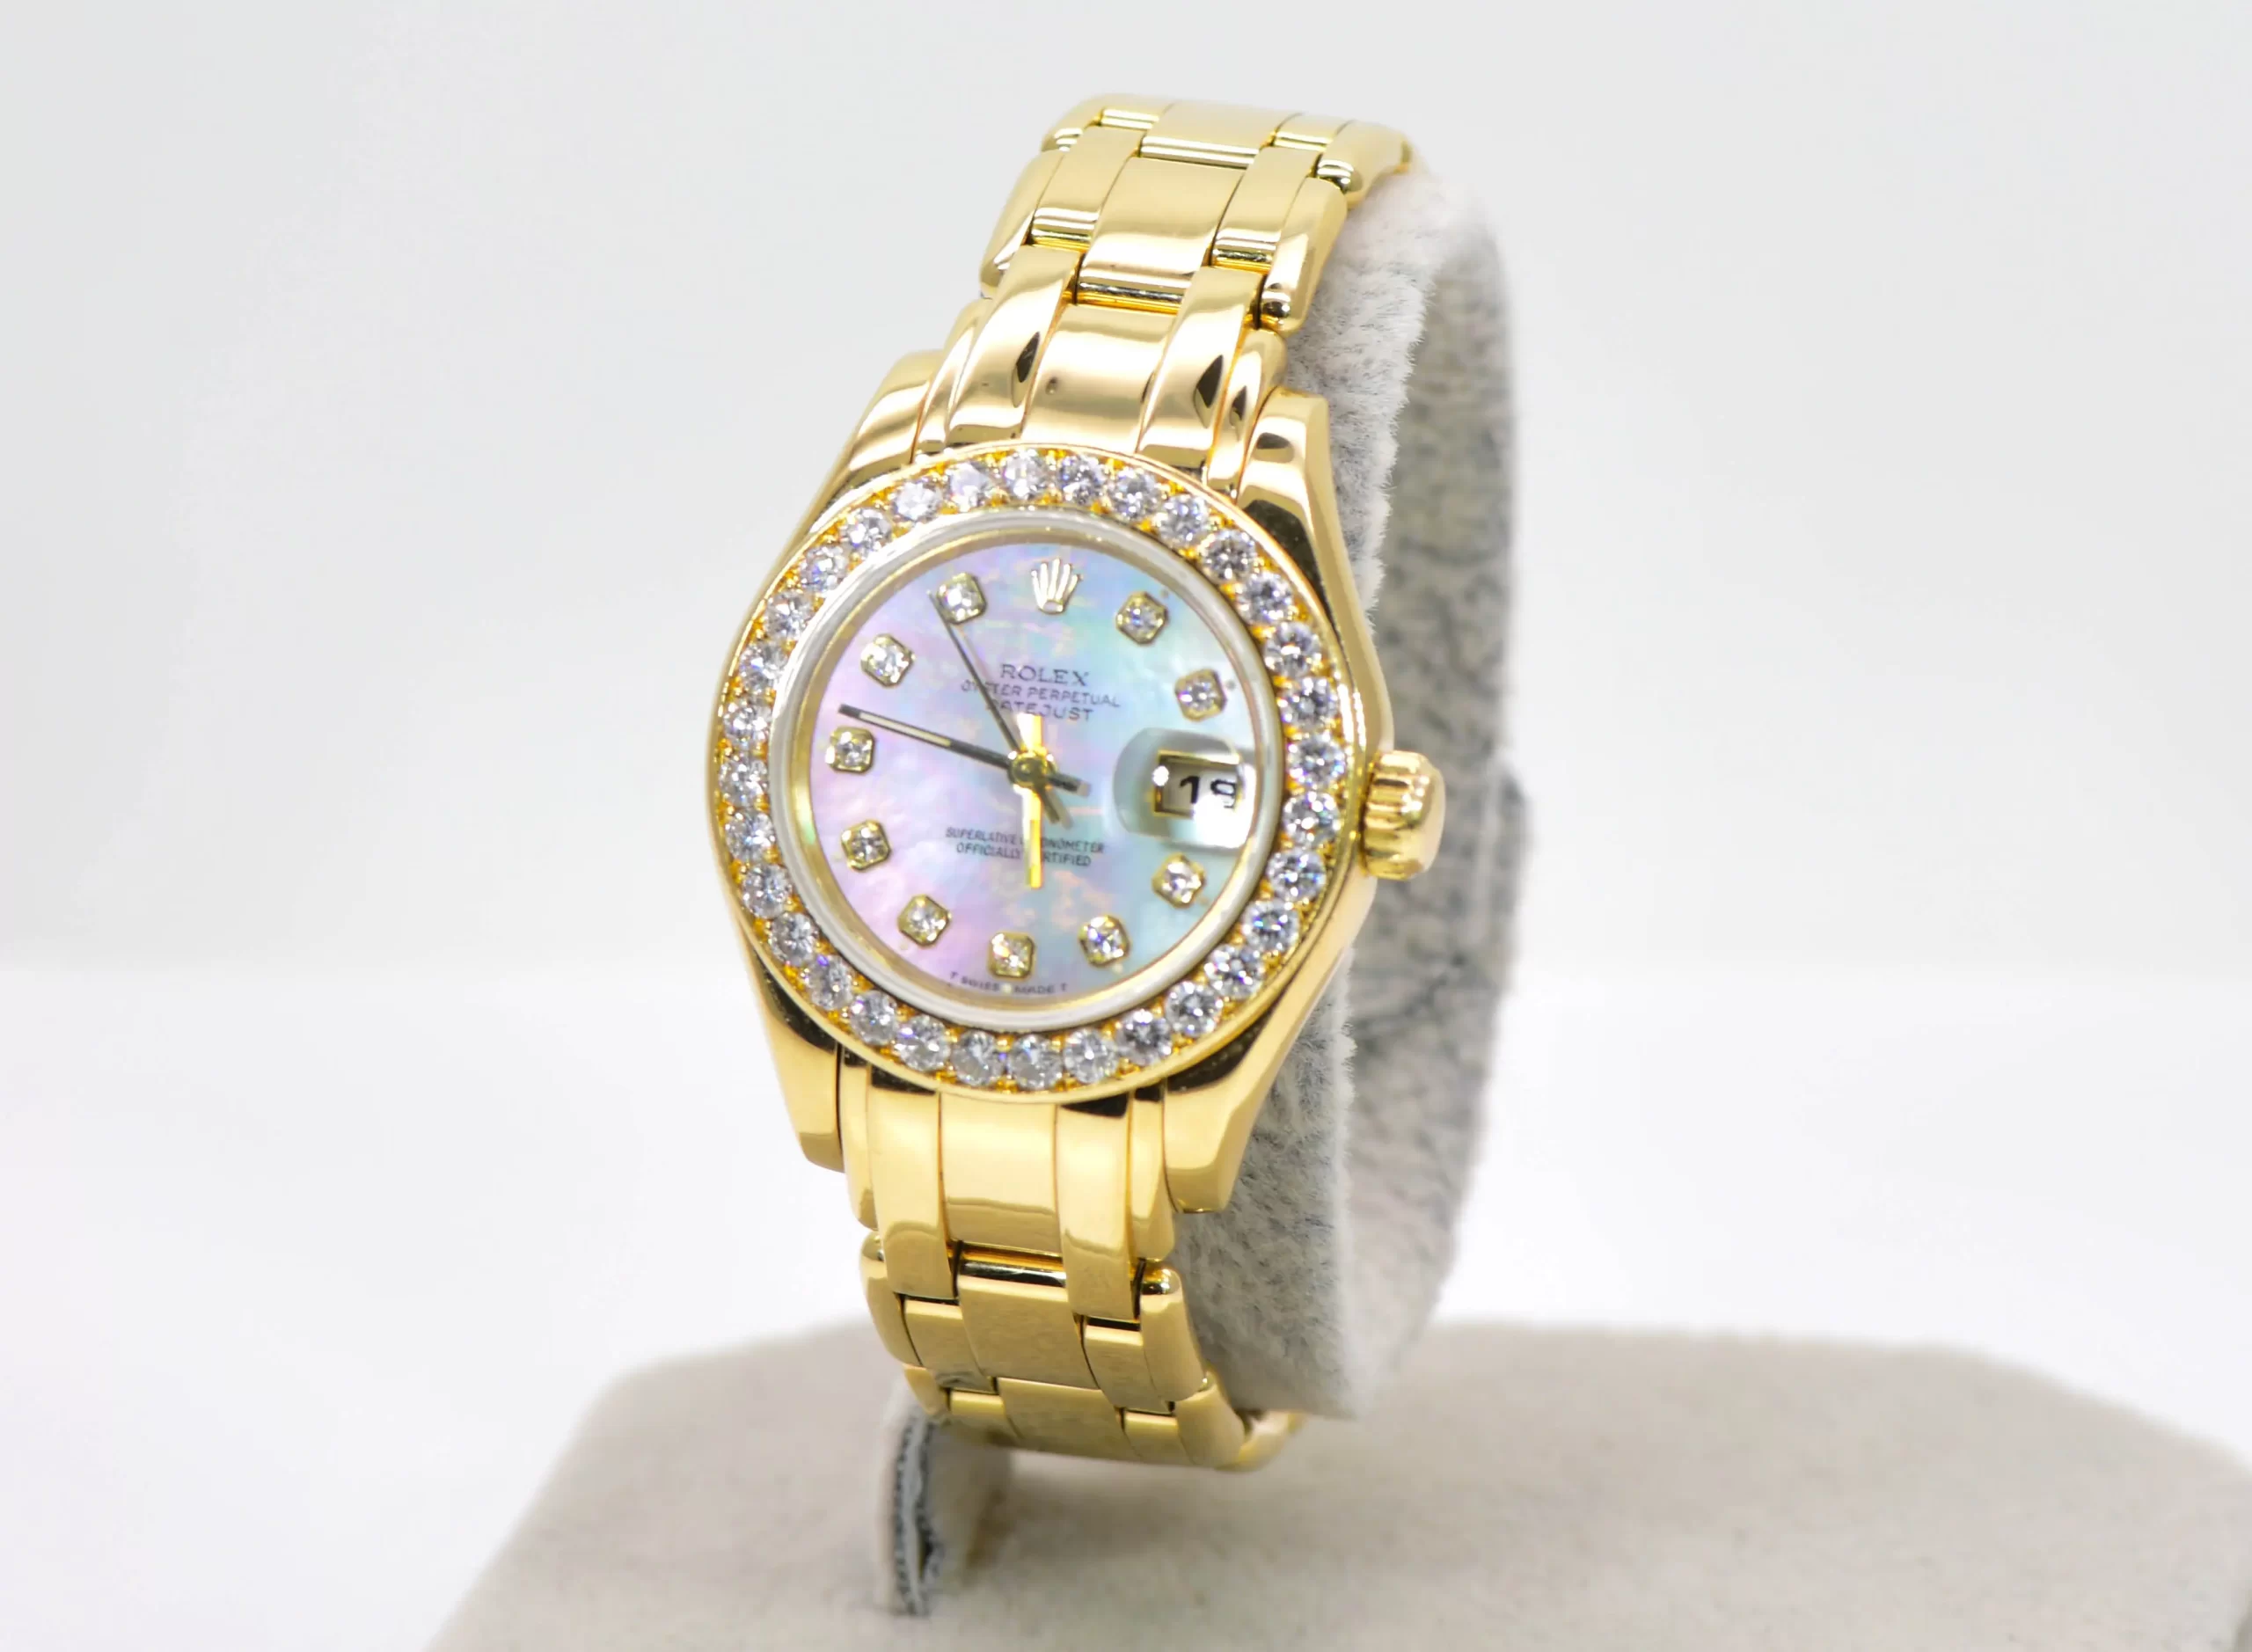 Rolex Datejust Ladies Pearlmaster 29mm Yellow Gold Watch